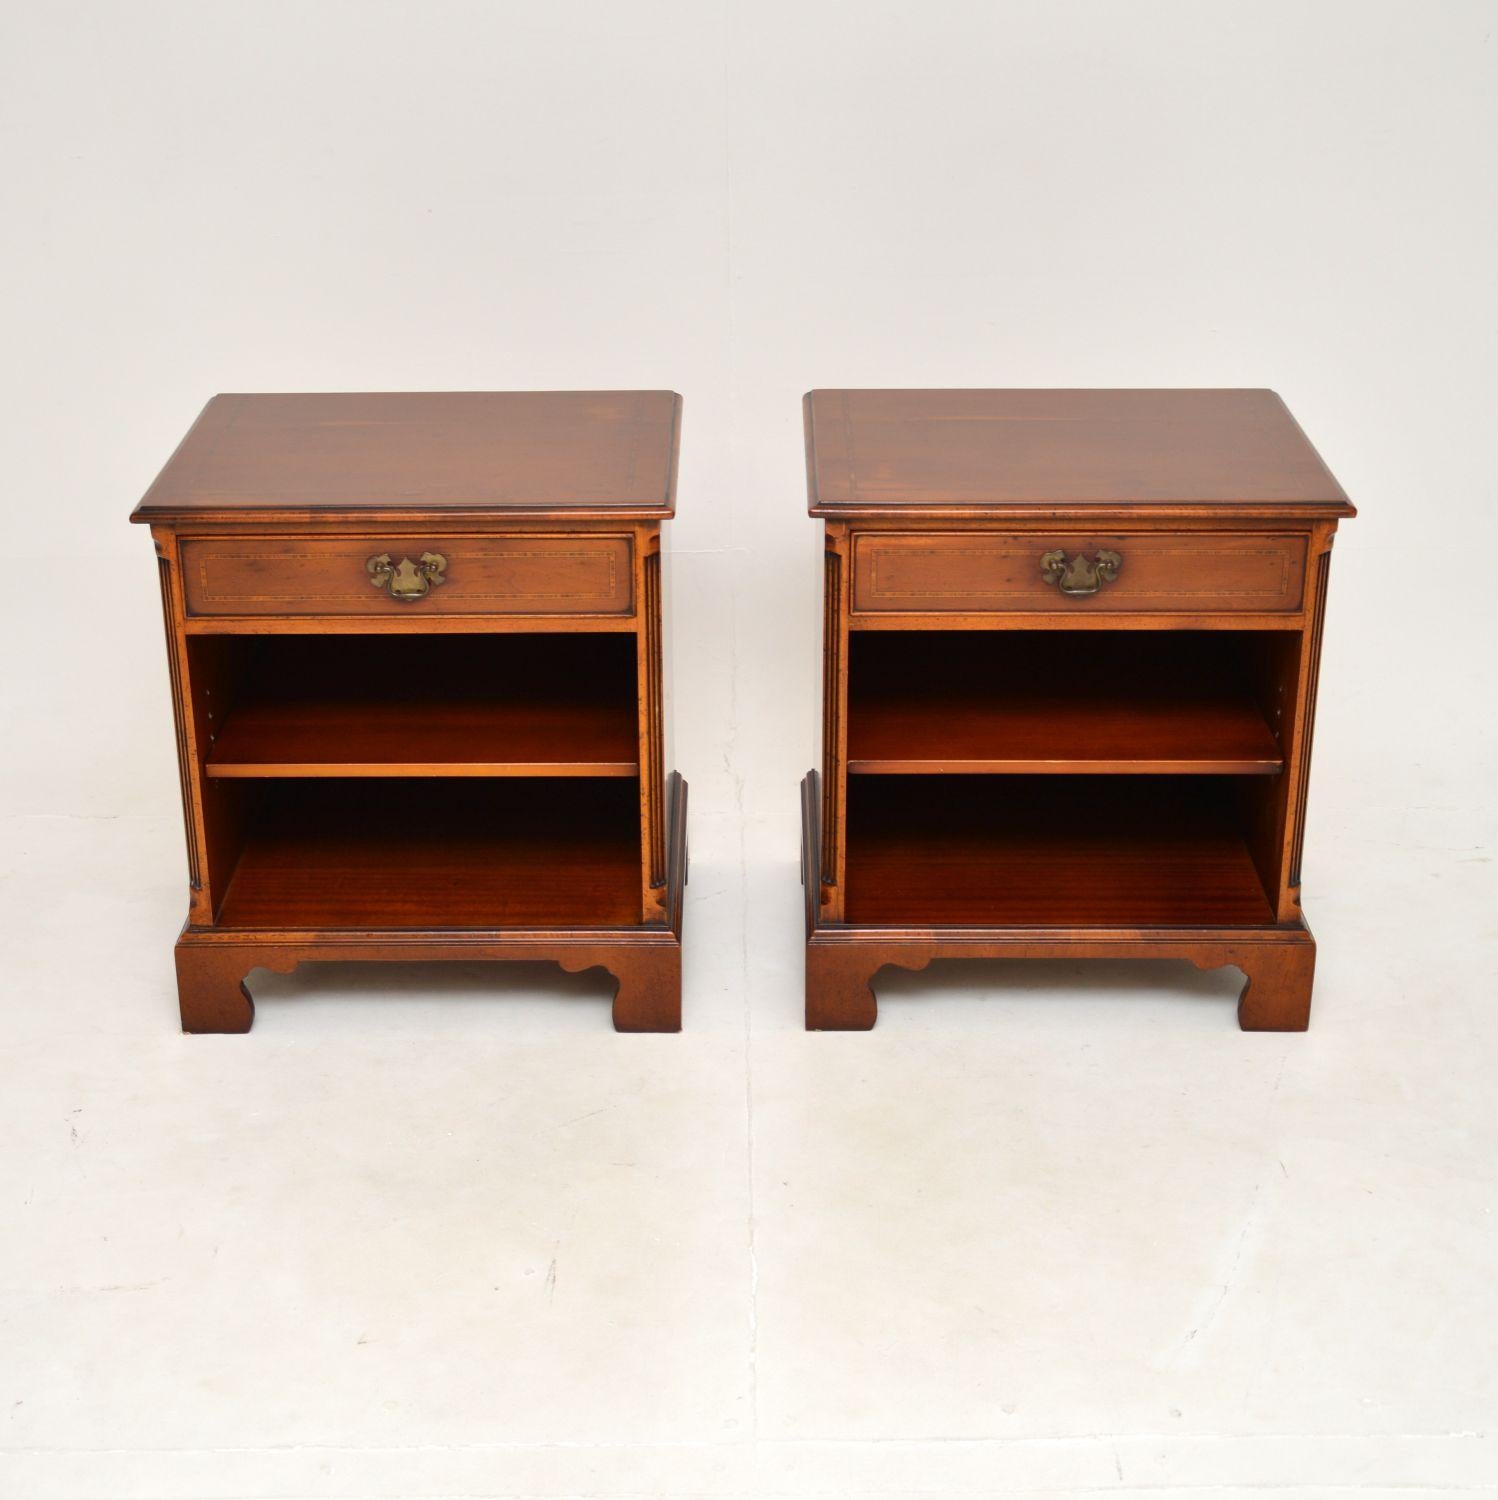 A lovely pair of antique Georgian style yew wood bedside cabinets. They were made in England, they date from around the 1960’s.

They are of superb quality and are a very useful size. Each has a single drawer at the top, with a lower open recessed